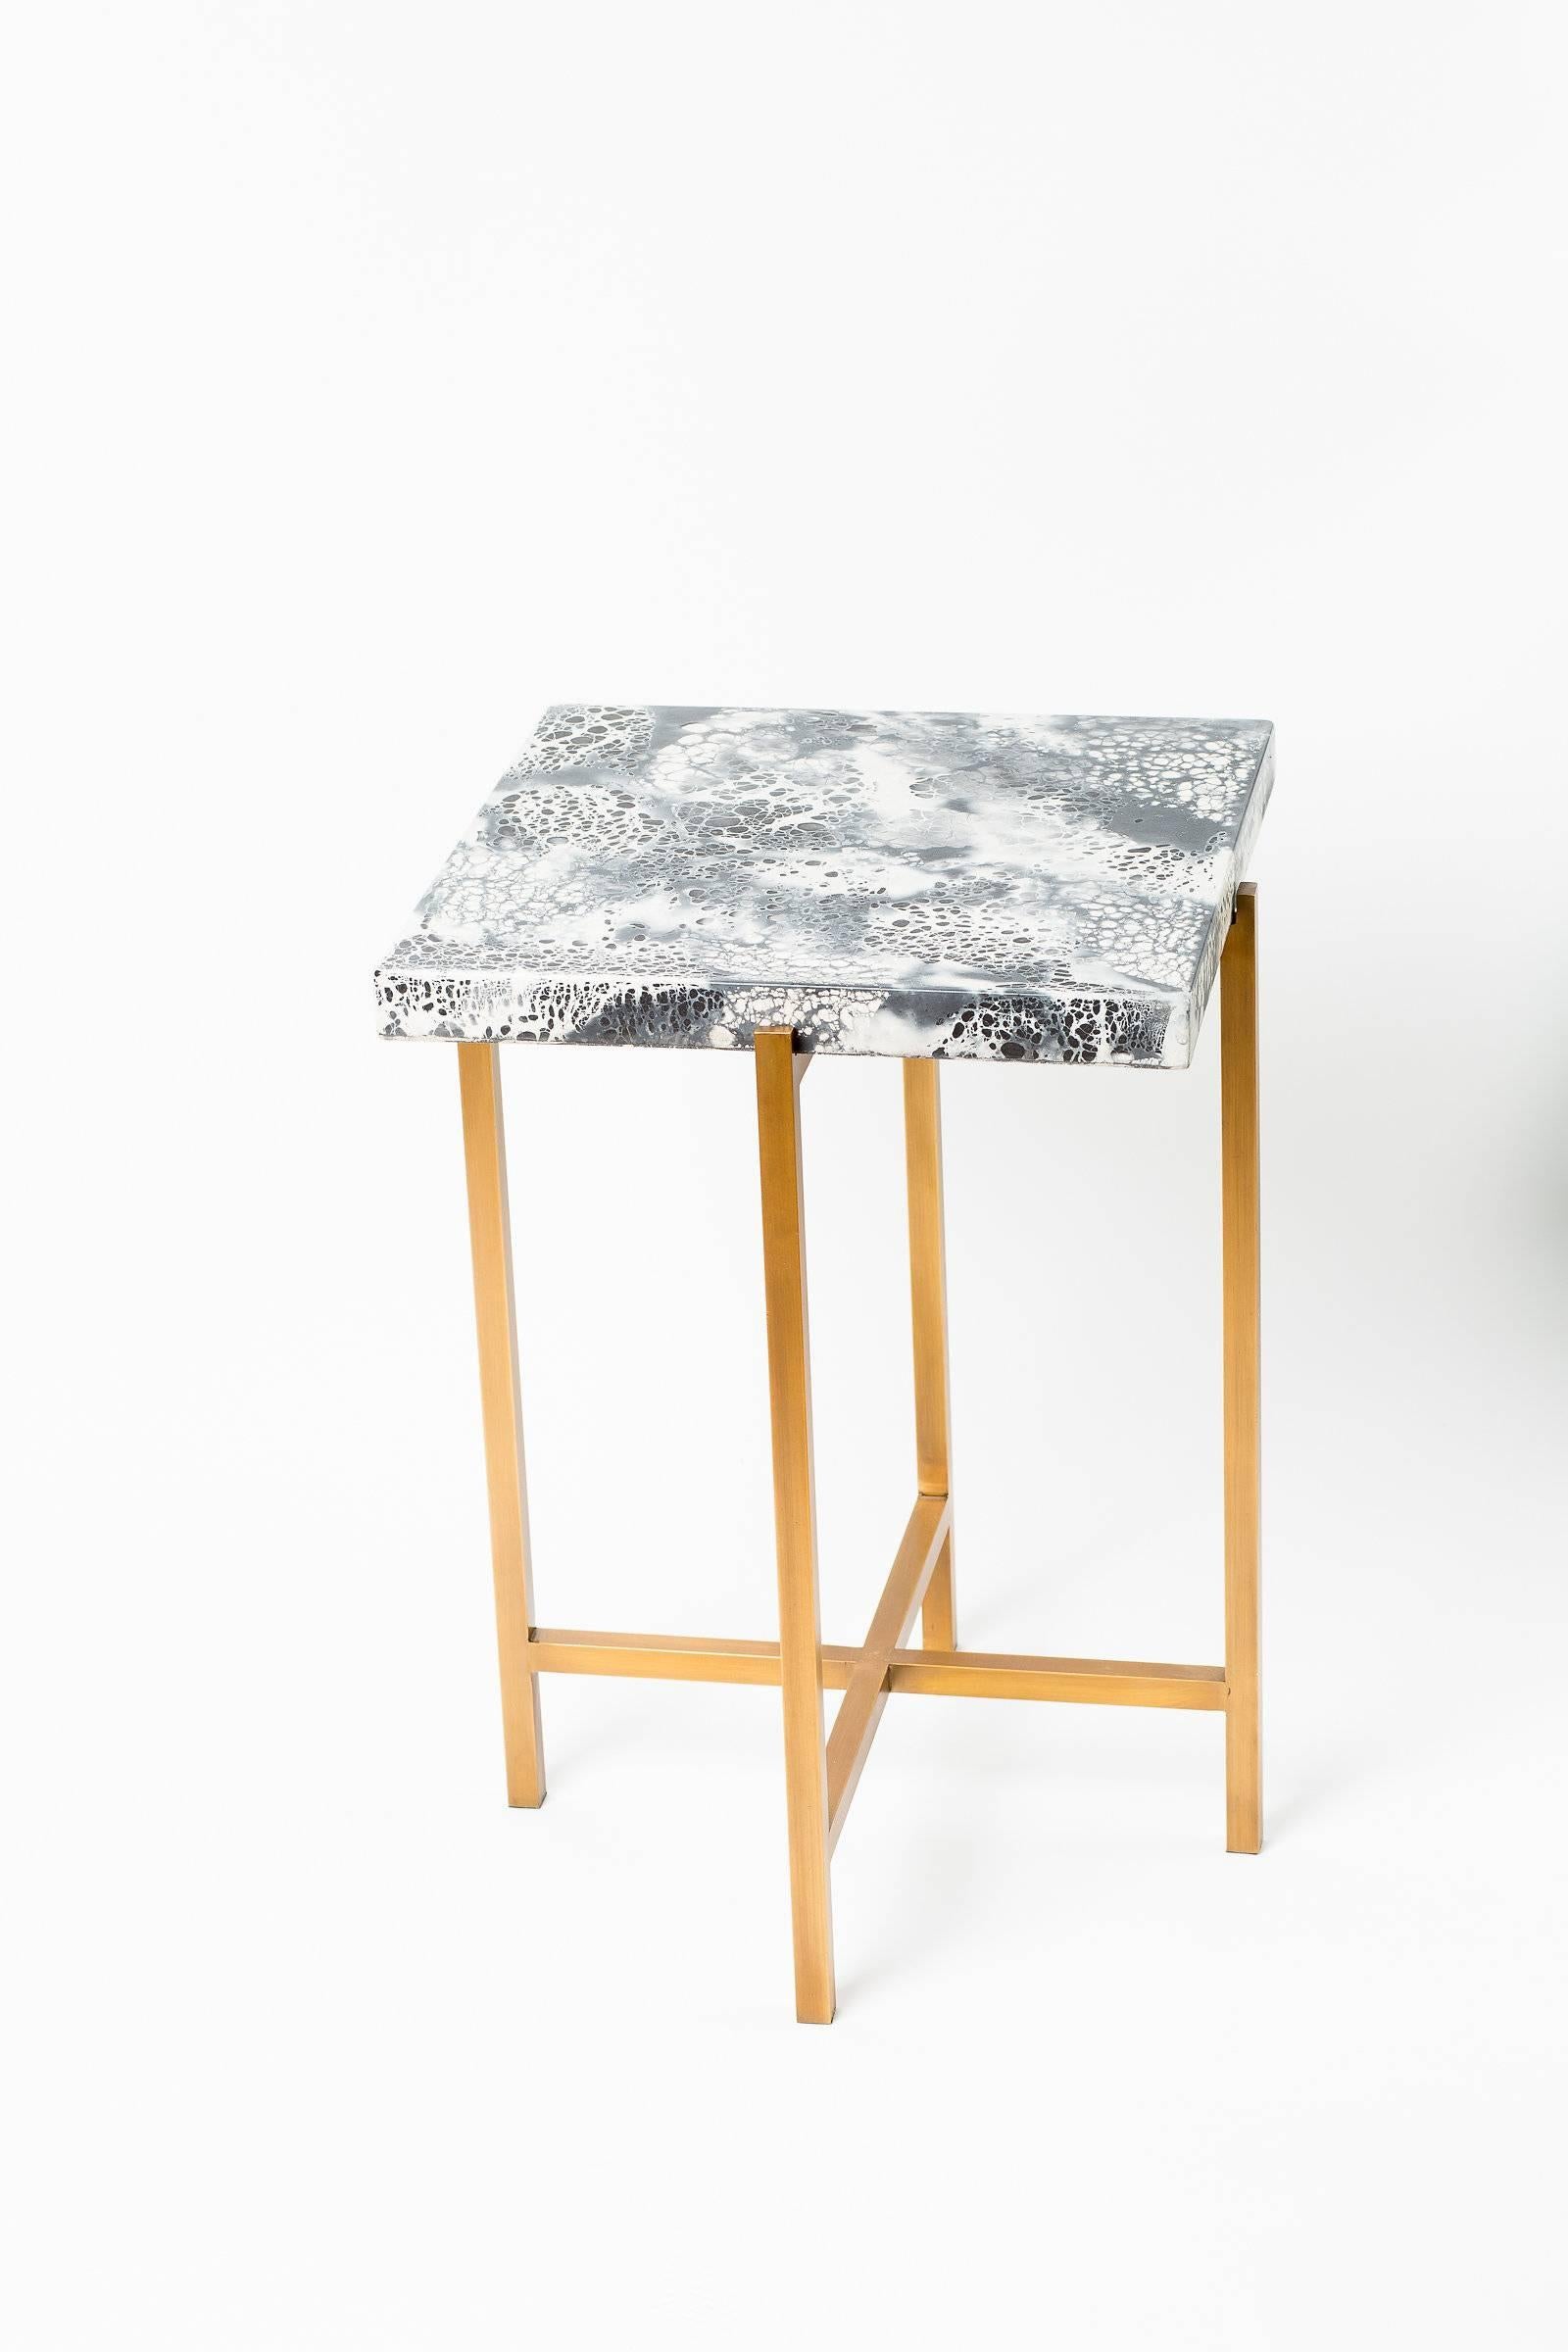 Kelly Behun Studio's grey and white smooth concrete side table is finished with an antiqued brass base. Made in Canada, this sturdy piece showcases the American designer's clean, modern aesthetic. 

Measures: 20.0